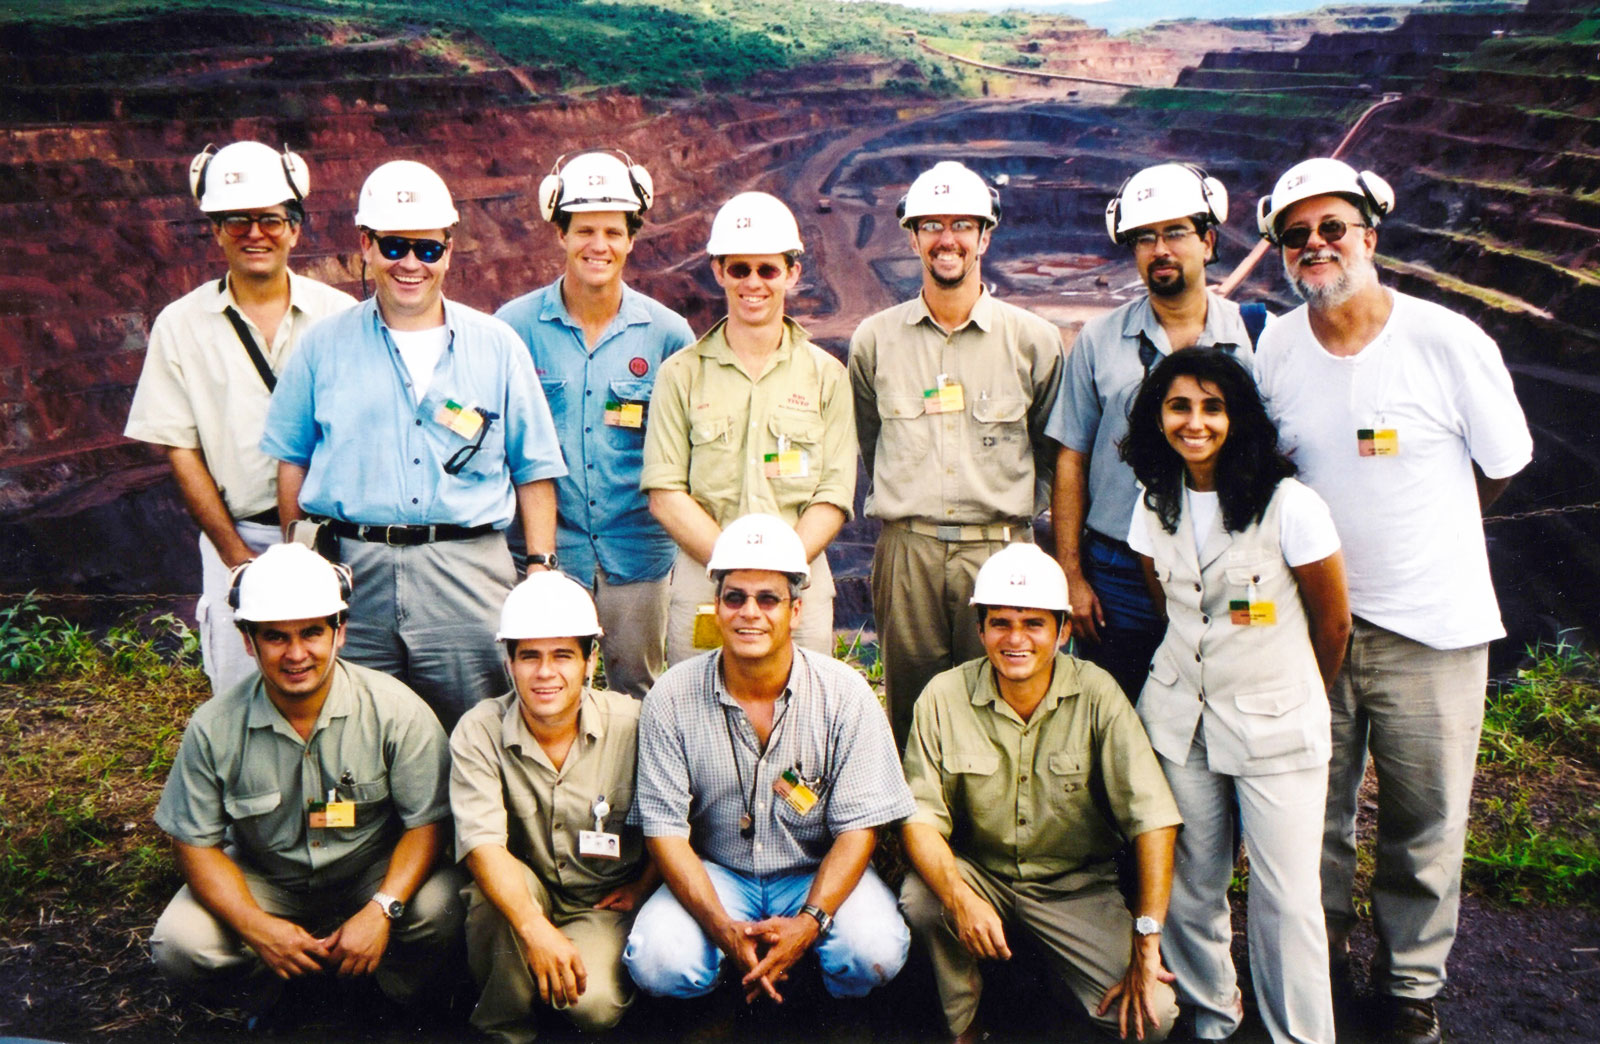 Group photo in the Crajas N5 open pit]